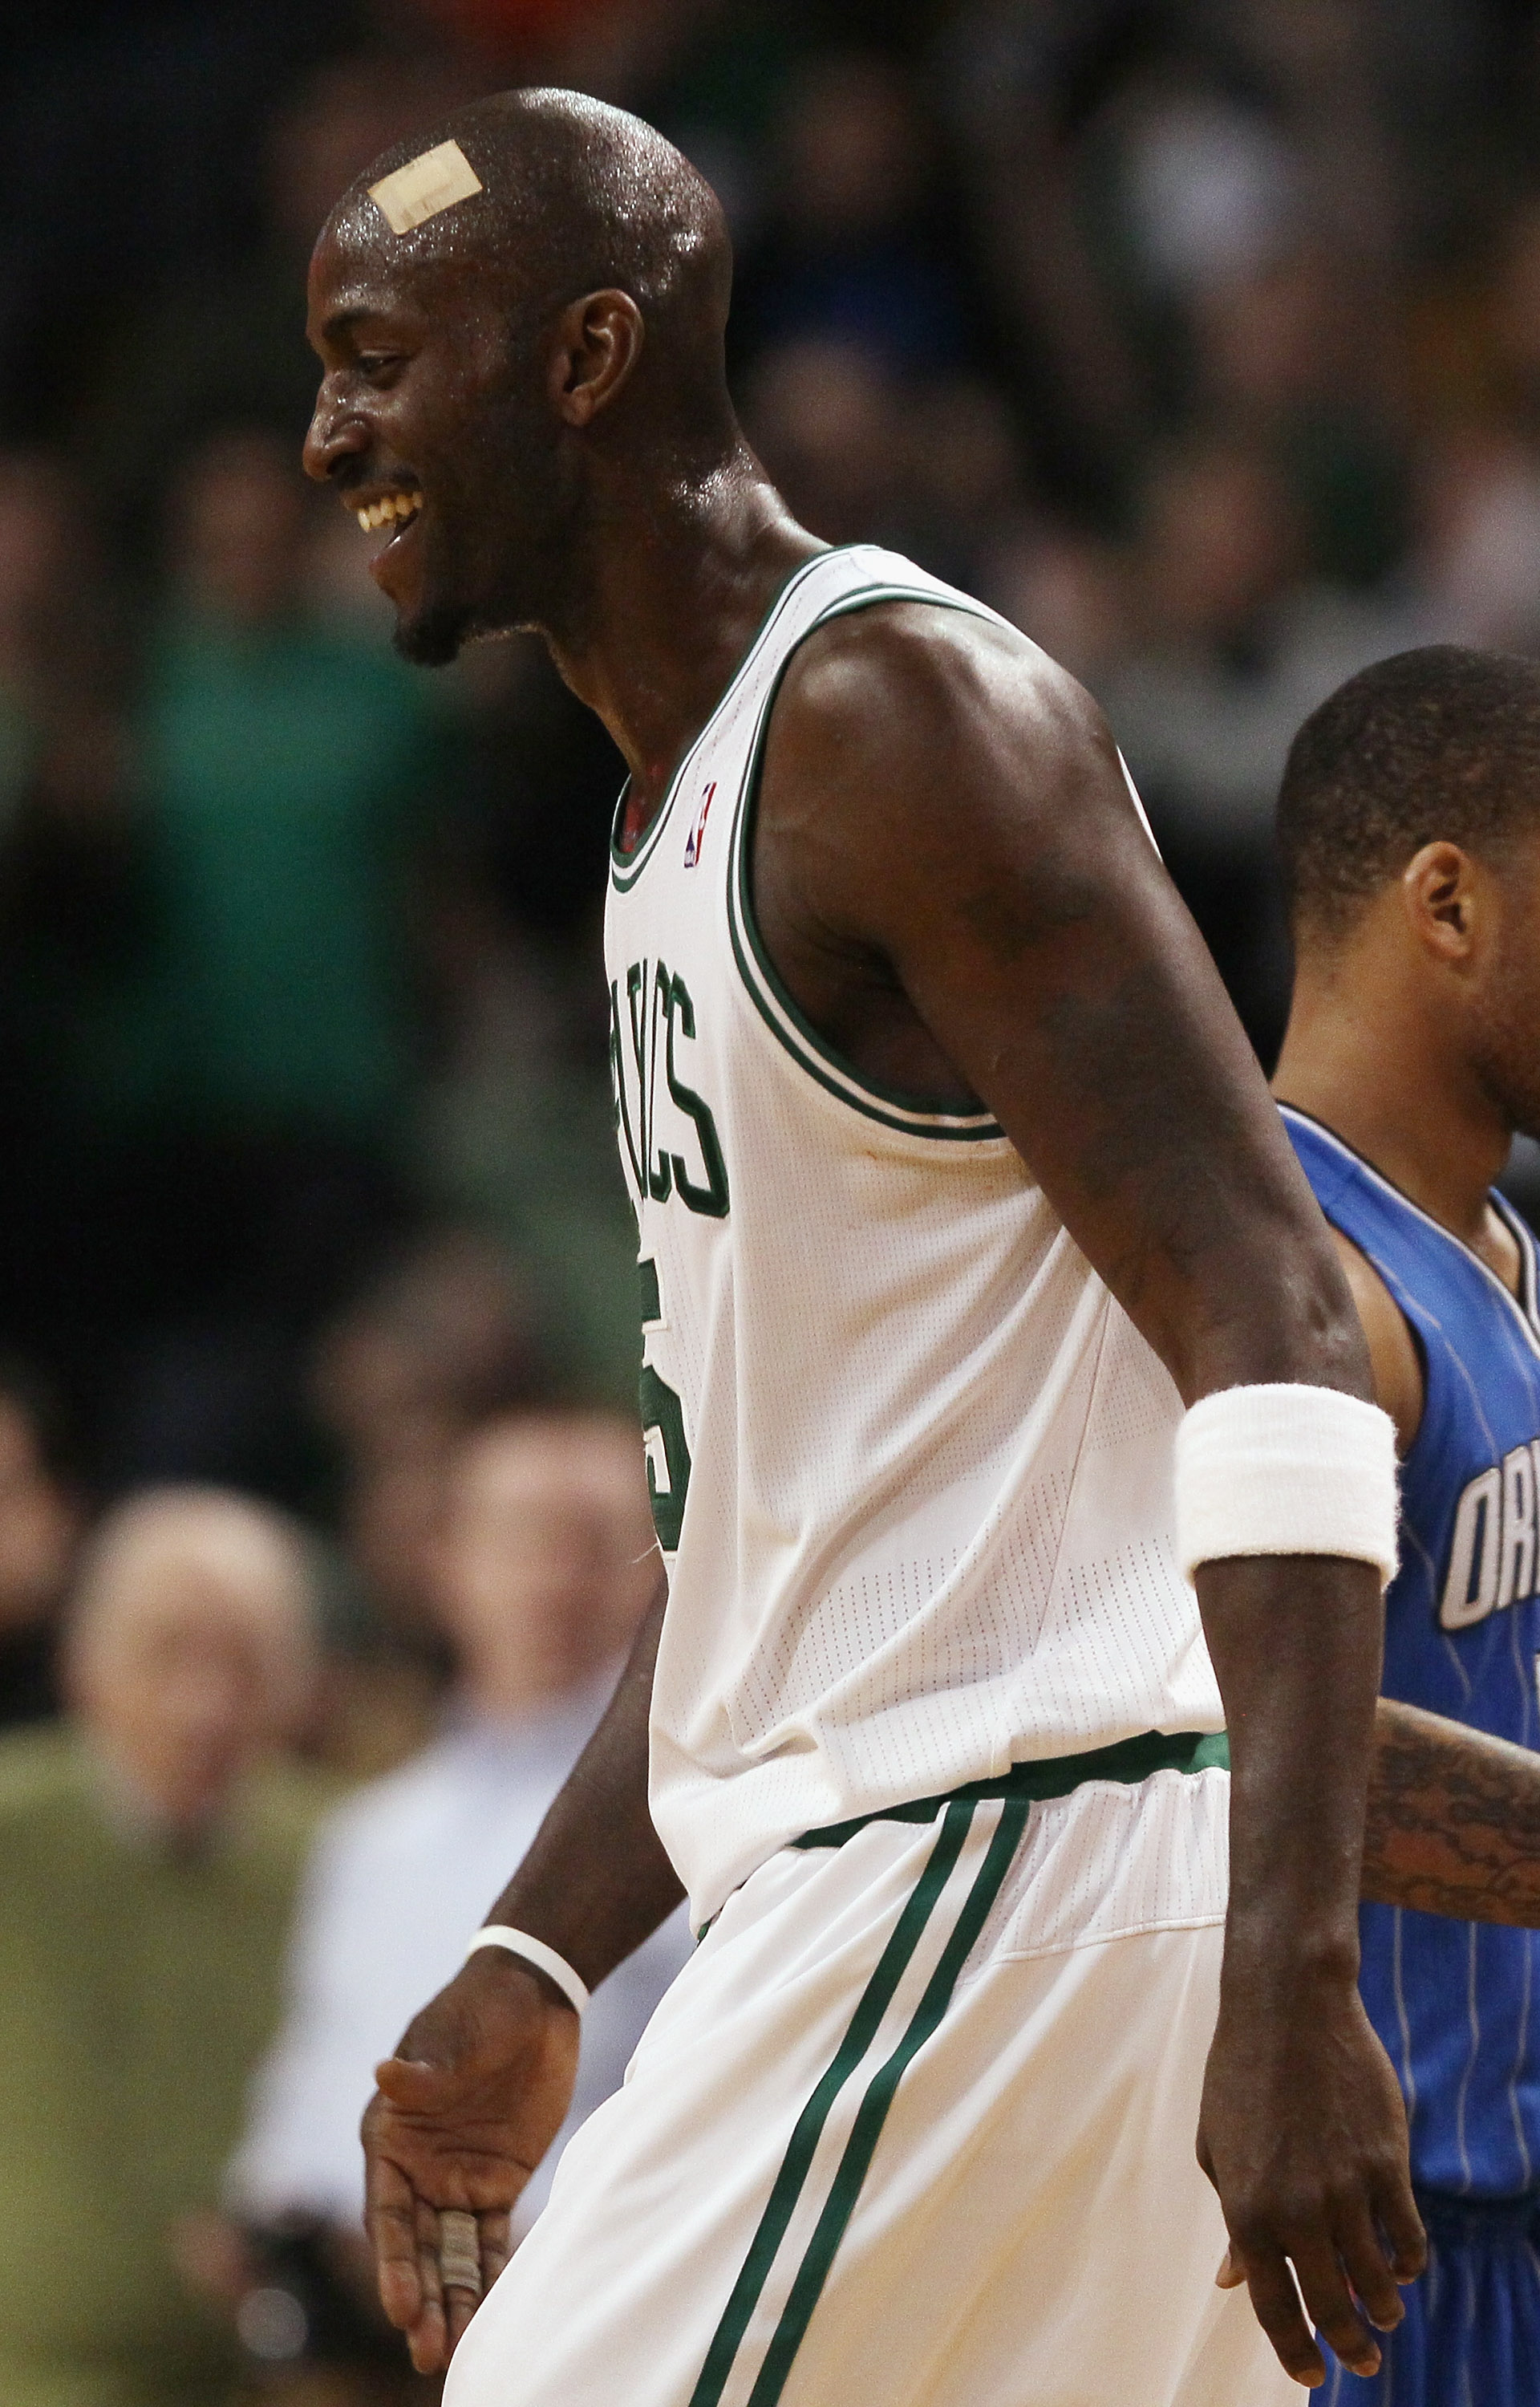 BOSTON, MA - FEBRUARY 06:  Kevin Garnett #5 of the Boston Celtics celebrates the win over the Orlando Magic on February 6, 2011 at the TD Garden in Boston, Massachusetts. The Celtics defeated the Magic 91-80. NOTE TO USER: User expressly acknowledges and 